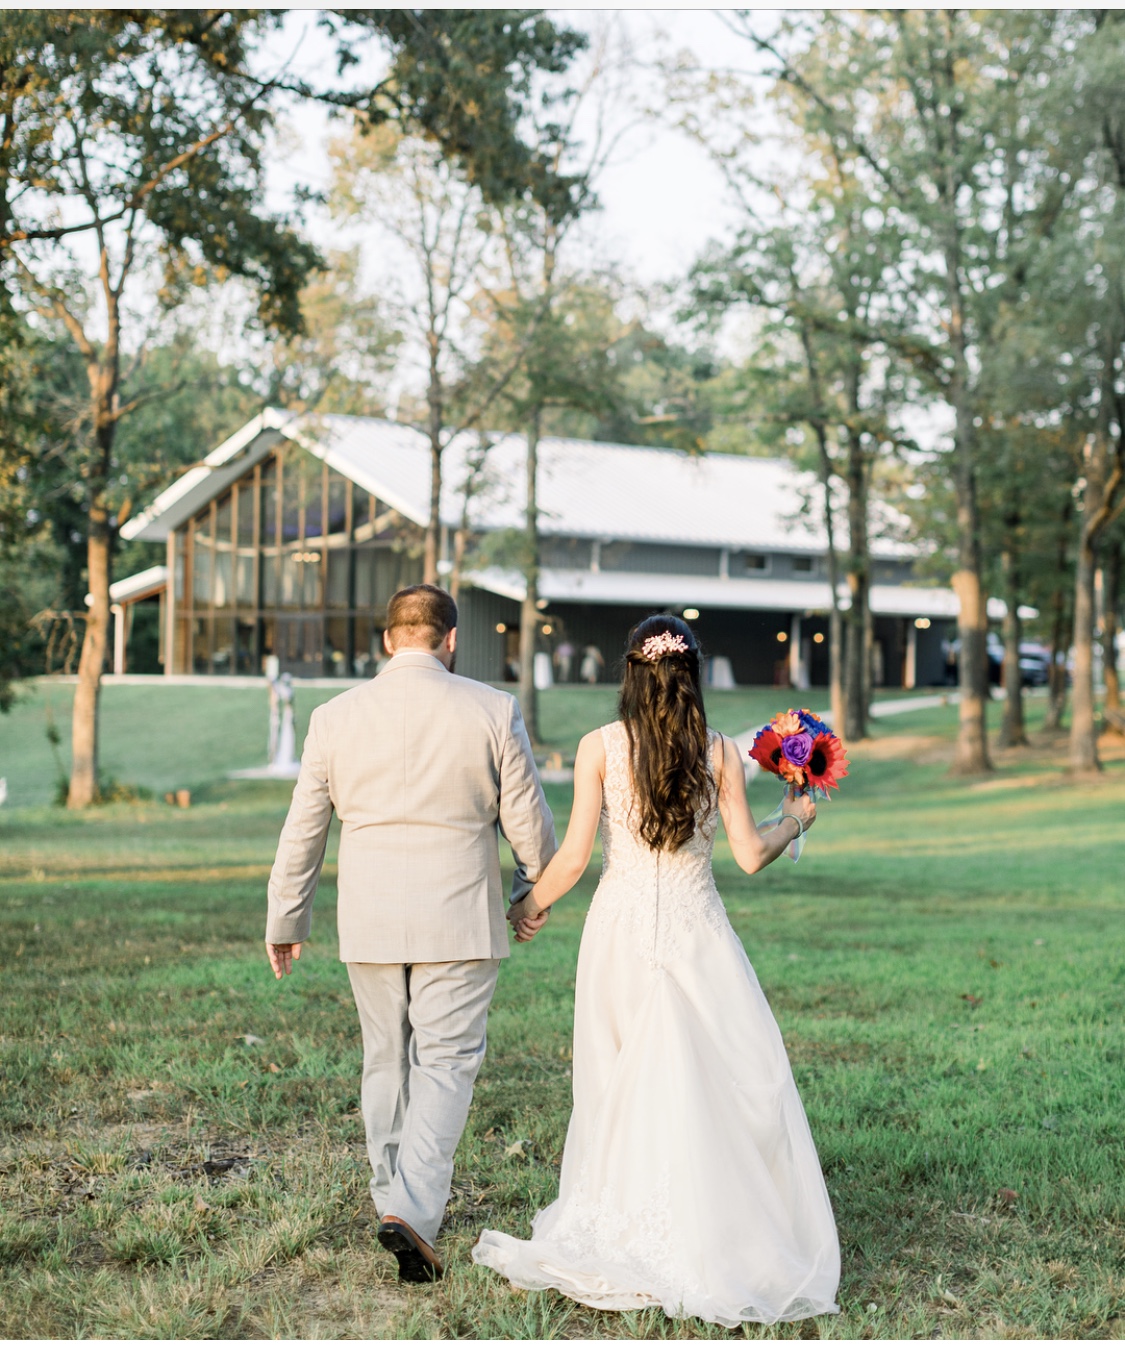 How To Choose A Wedding Venue from Burdoc Farms featured on Nashville Bride Guide